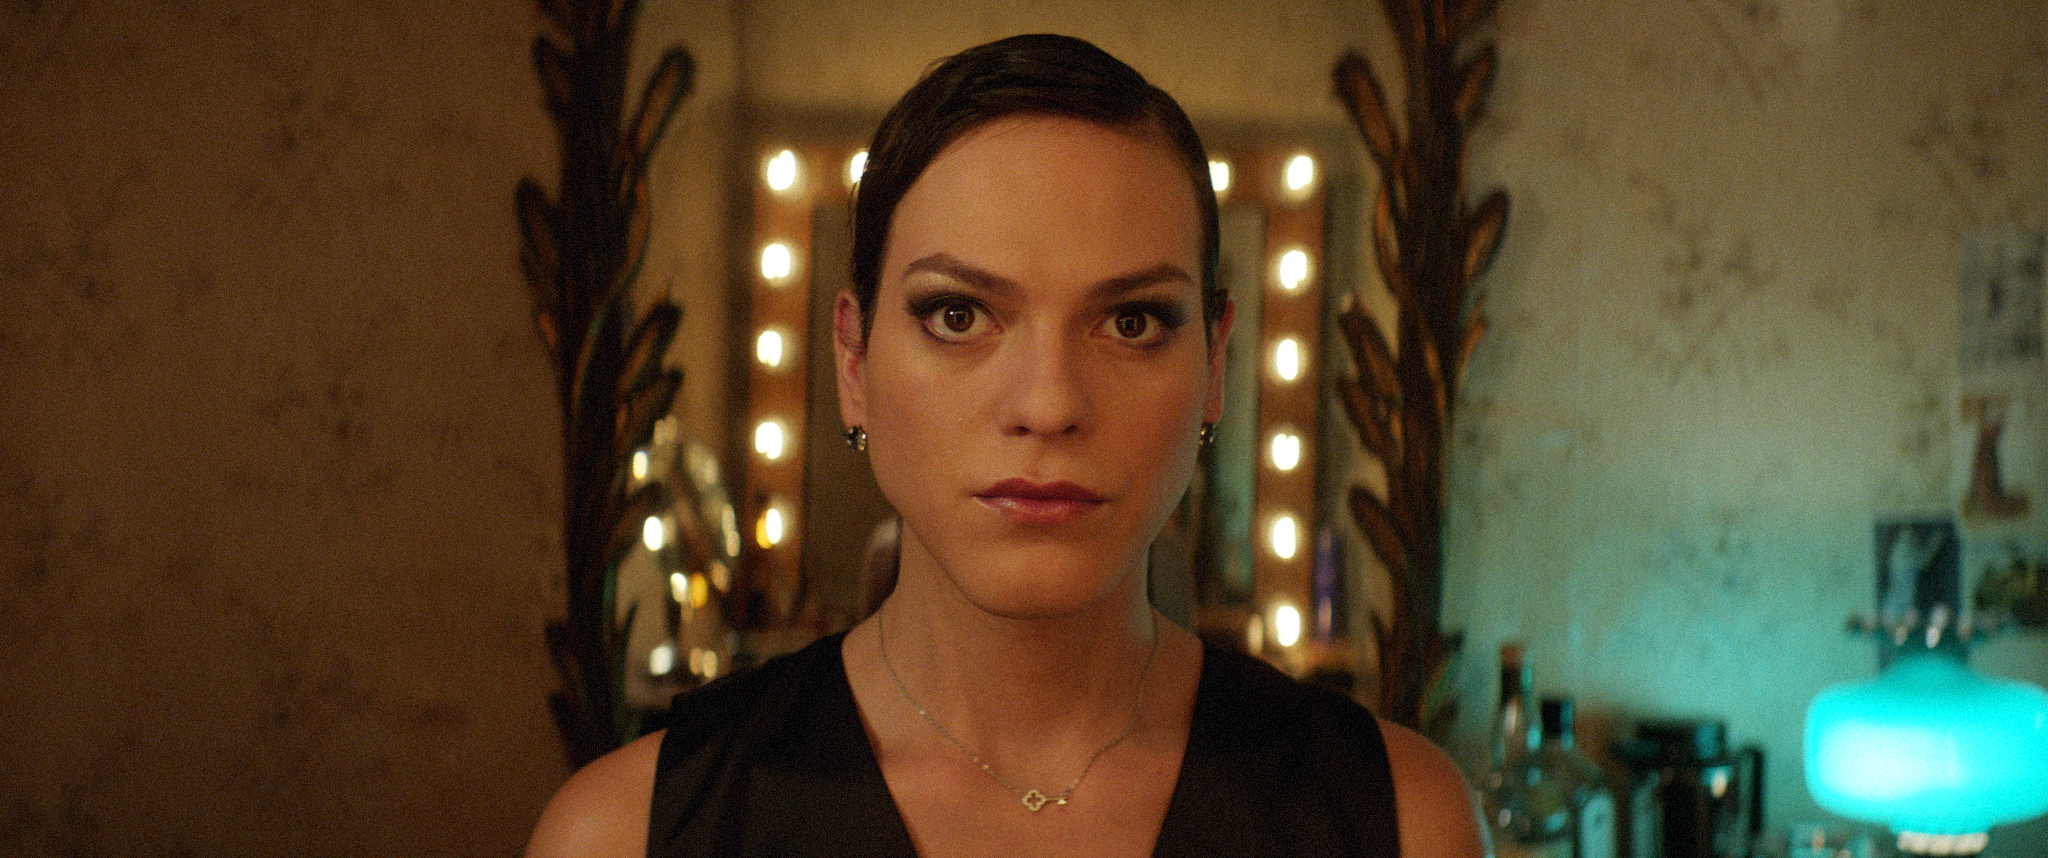 Chilean actress Daniela Vega stars in 'A Fantastic Woman,' which is up for best foreign language film at the 2018 Academy Awards. (Fabula)